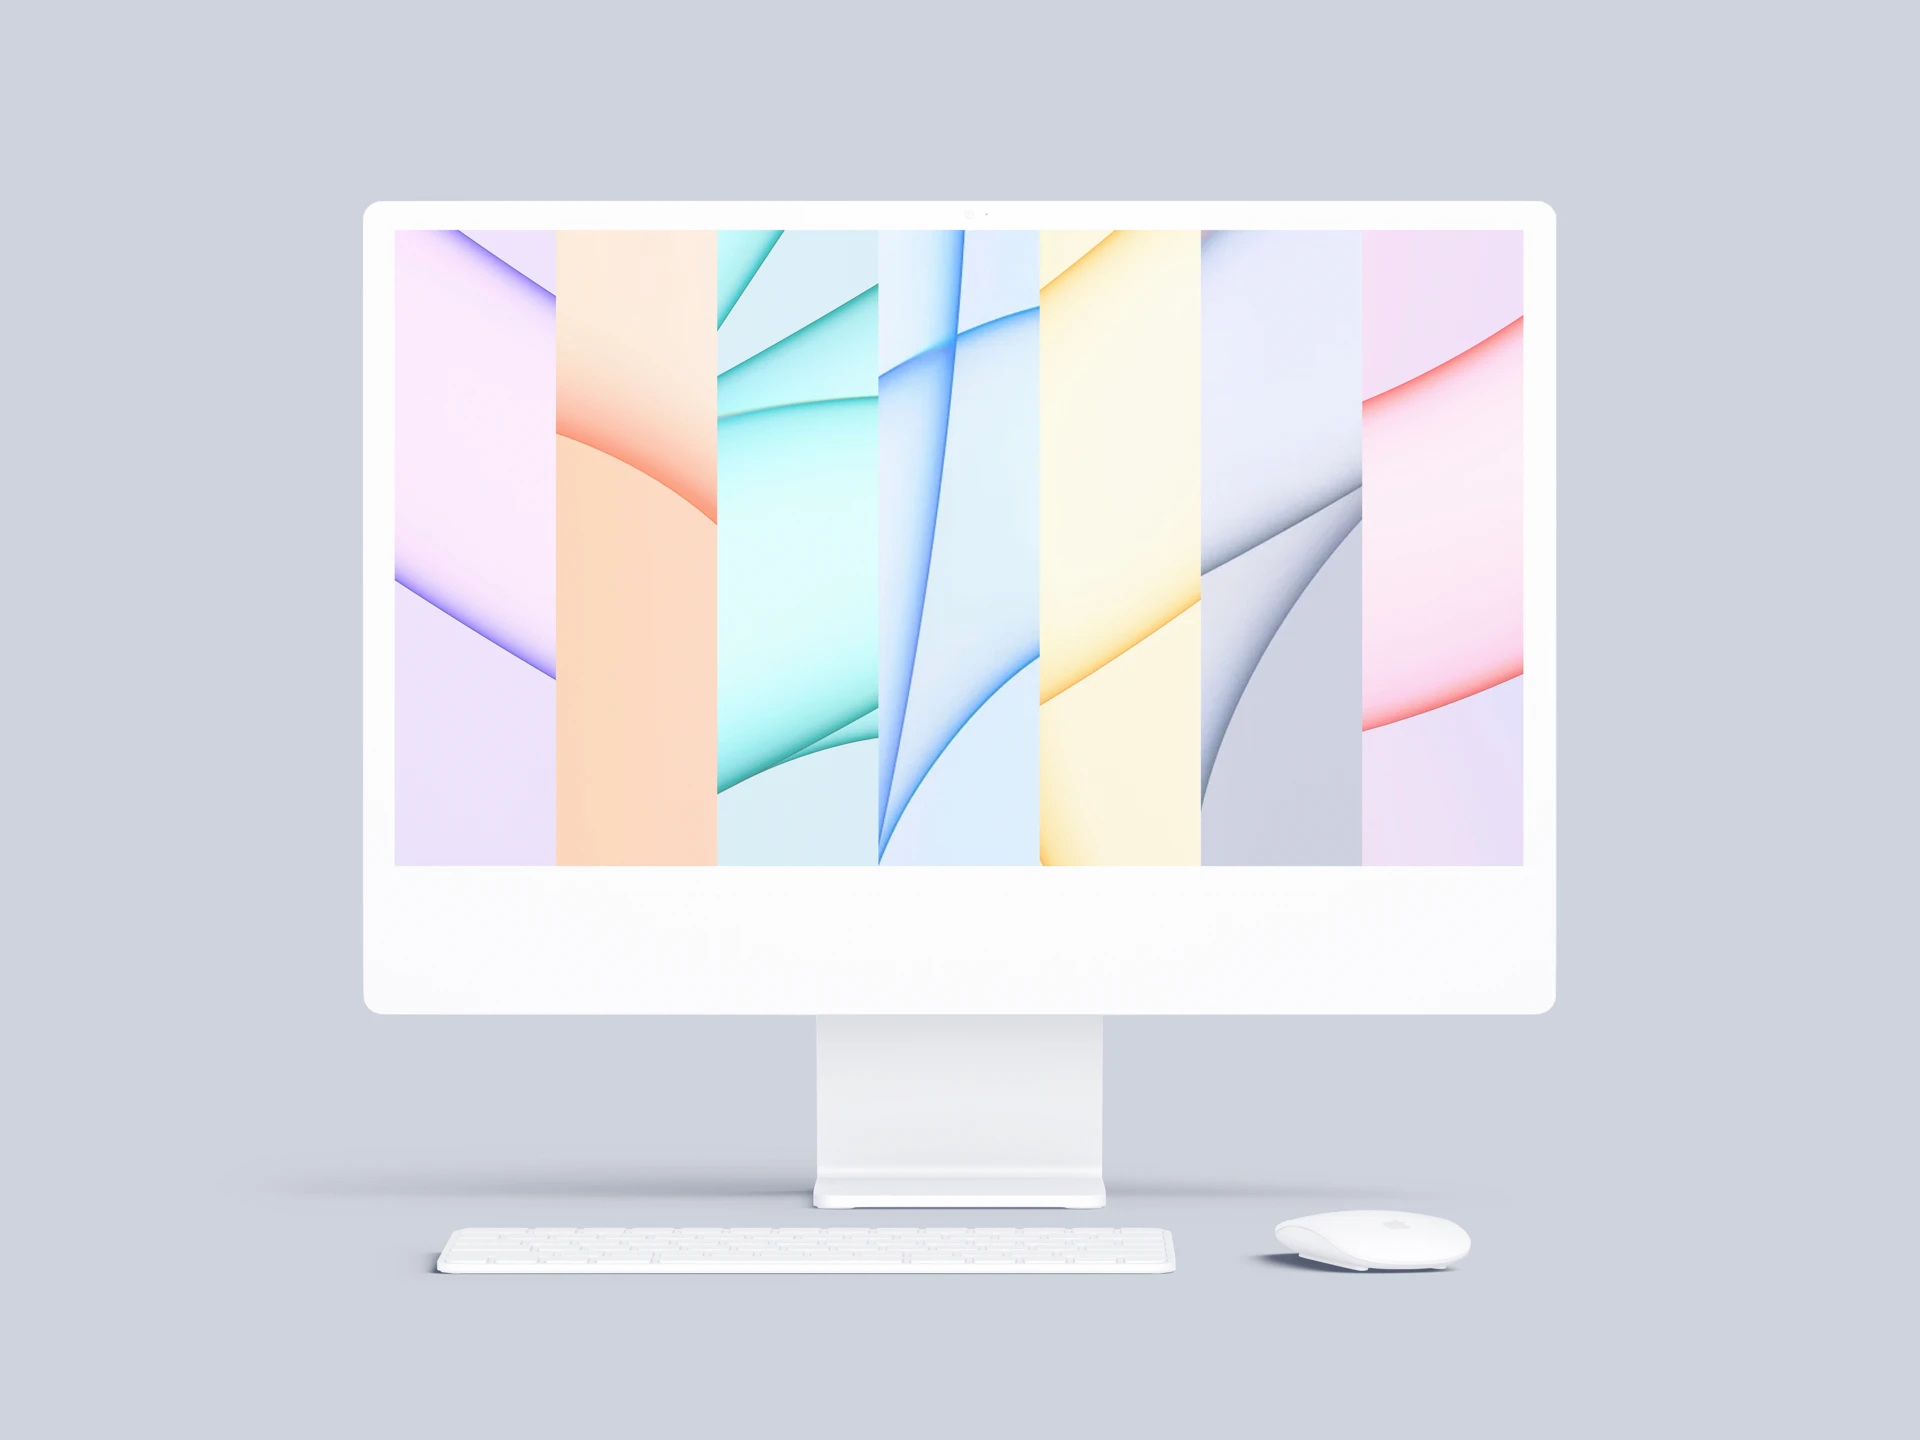 Free iMac 24-inch Mockup (2021) - Meet the new iMac mockup in a premium quality and 7 color styles. You can easily customize this photorealistic mockup, thanks to smart layers function.